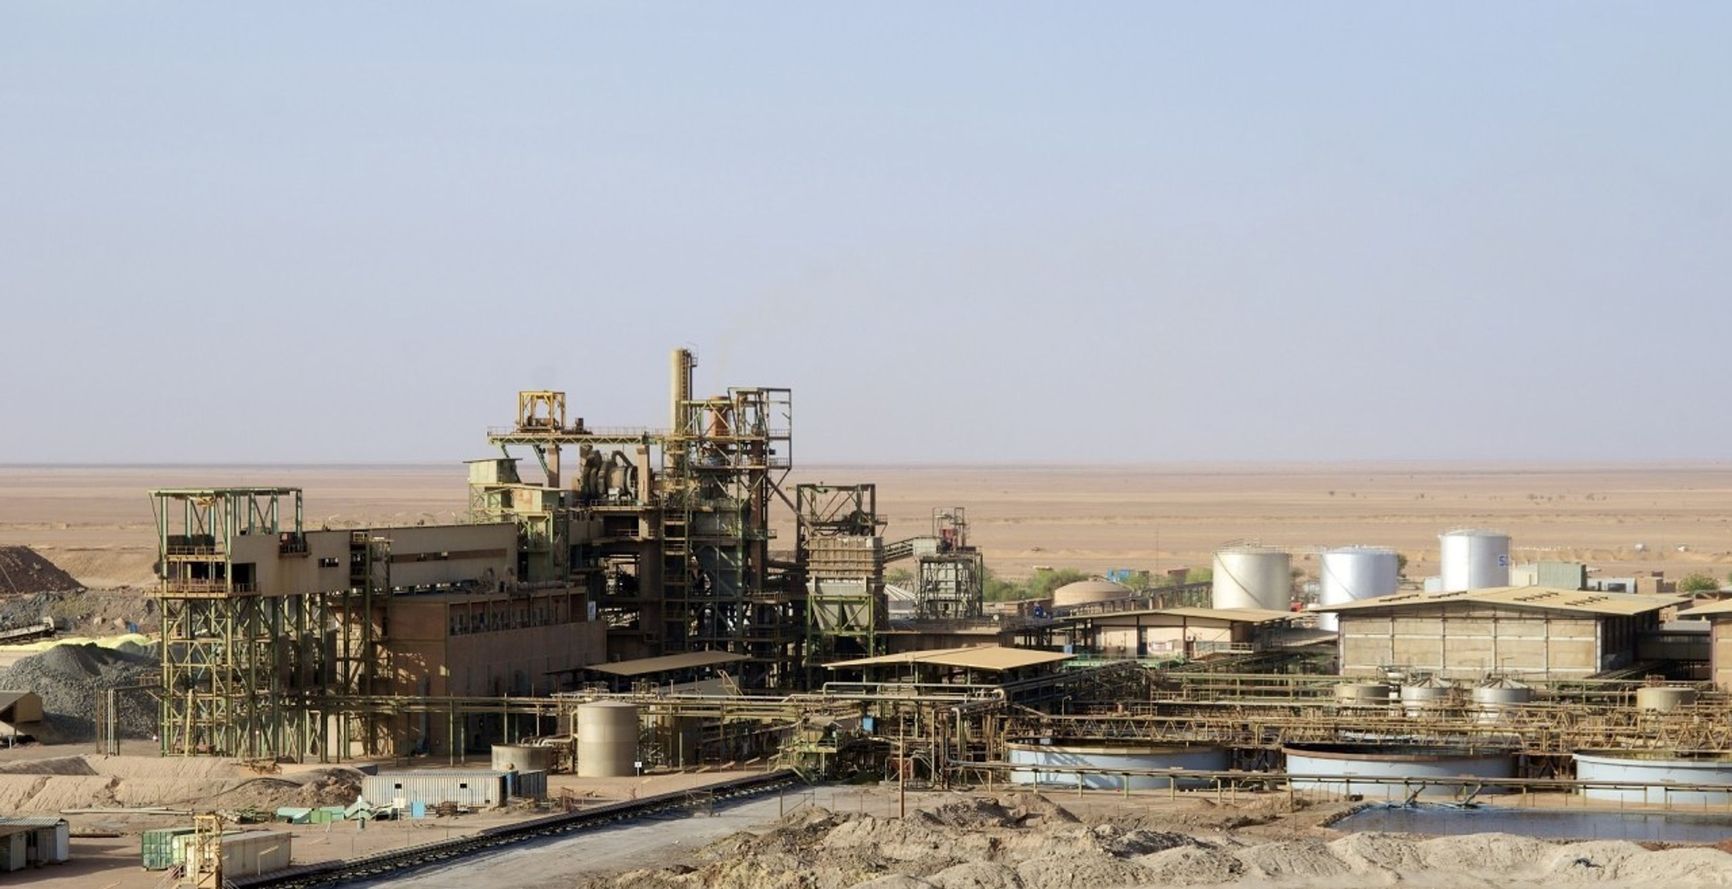 The Somair uranium mine near the town of Arlit, Niger, is operated by the French company Orano. In August, security concerns prompted the evacuation of some personnel 